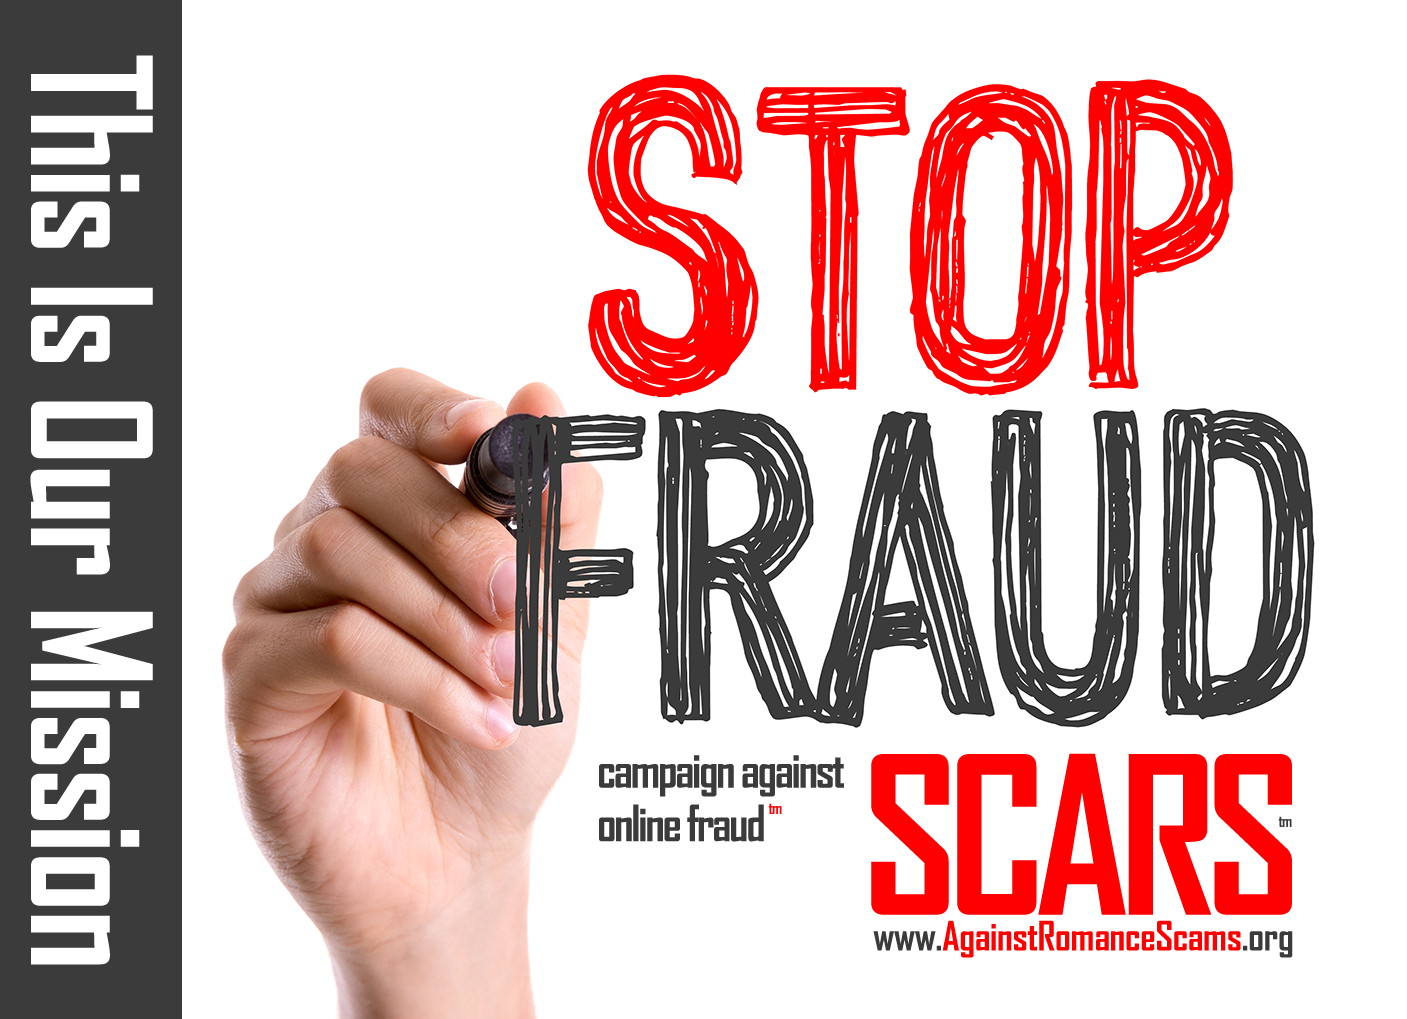 Our Mission Is To Stop Fraud Online